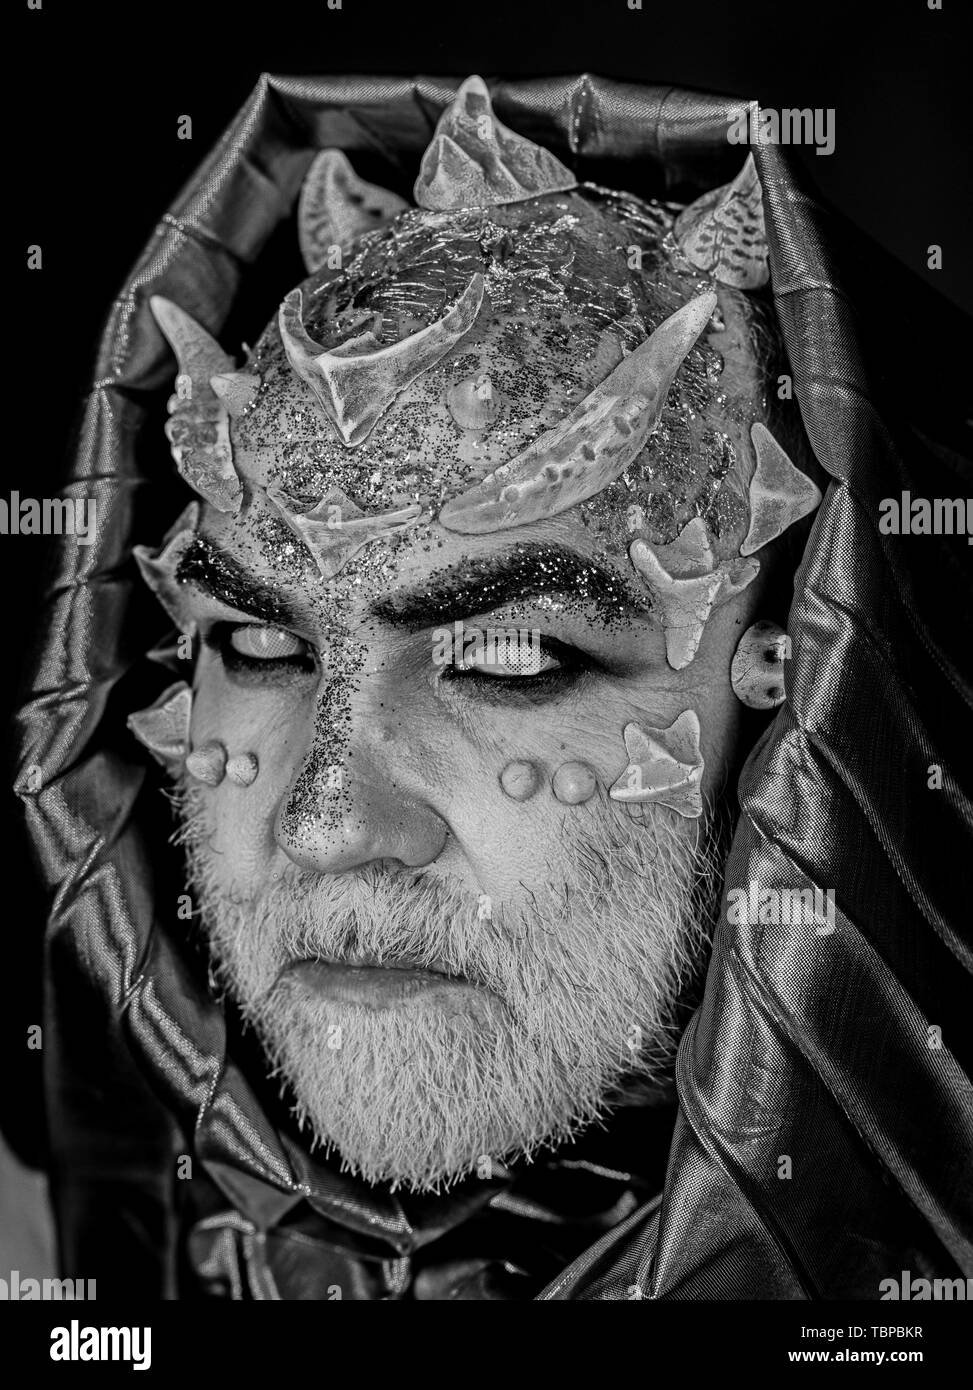 Man with thorns or warts, face covered with glitters. Senior man with white beard dressed like monster. Alien, demon, sorcerer makeup. Fantasy concept Stock Photo